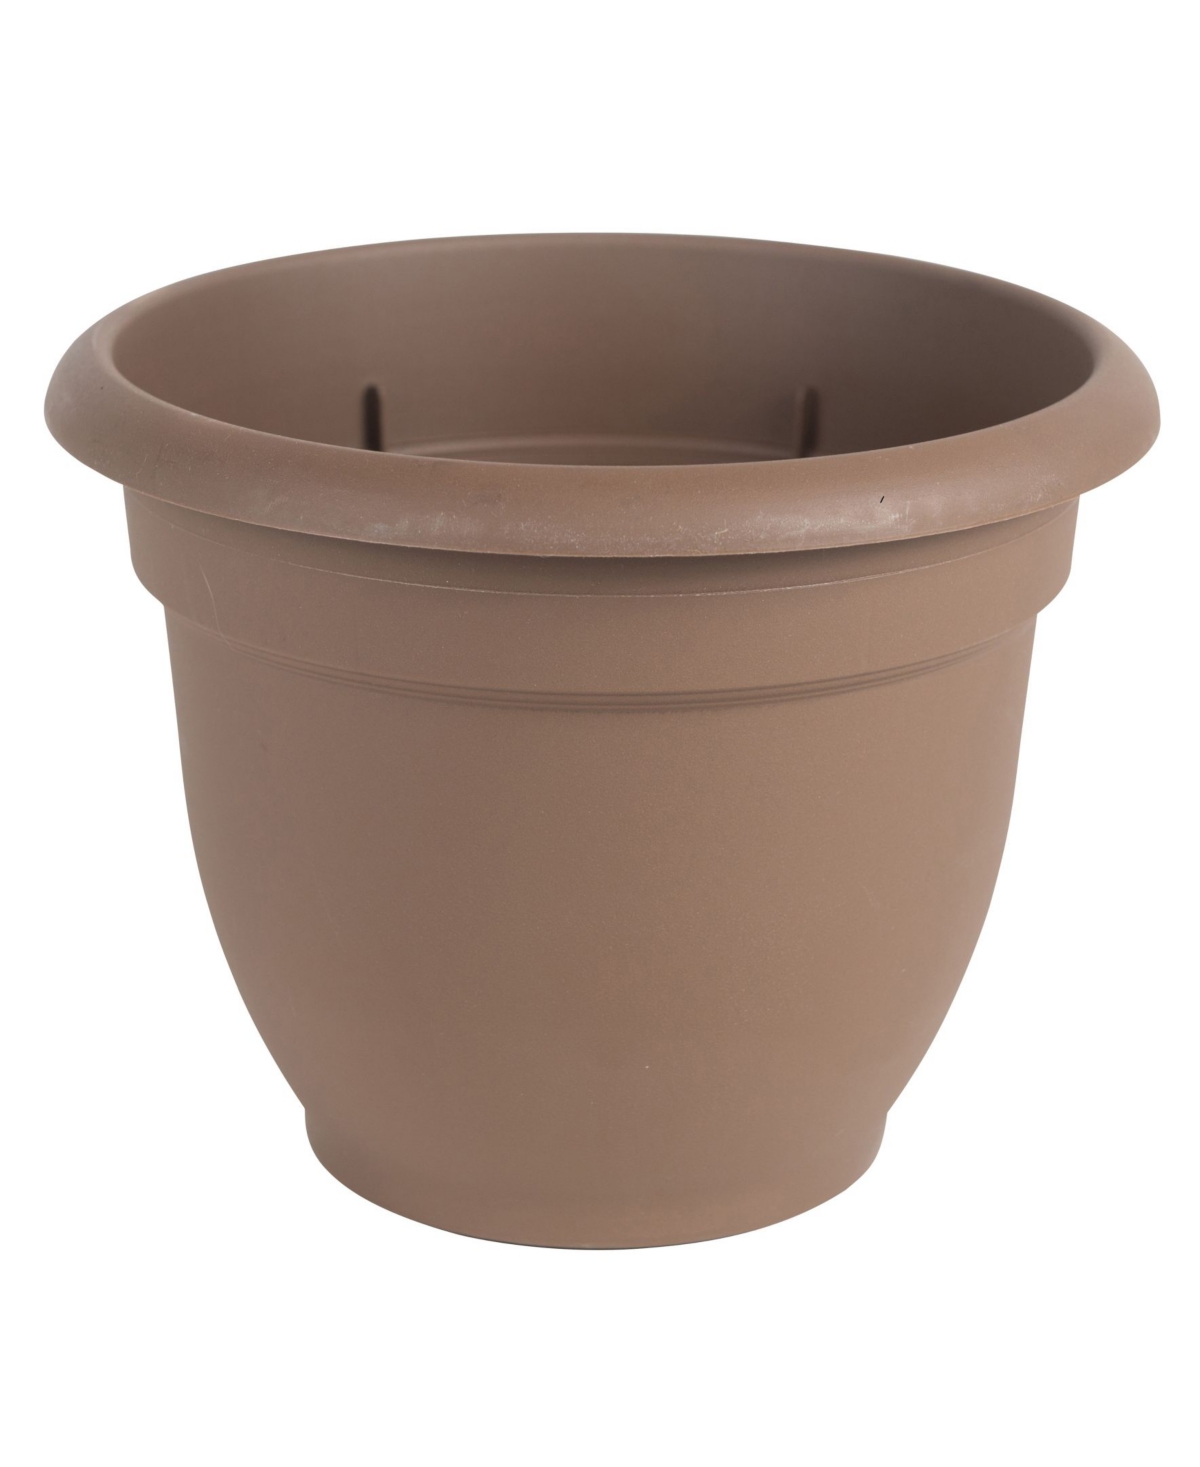 Ariana Planter with Self-Watering Grid, Chocolate - 10 inches - Chocolate